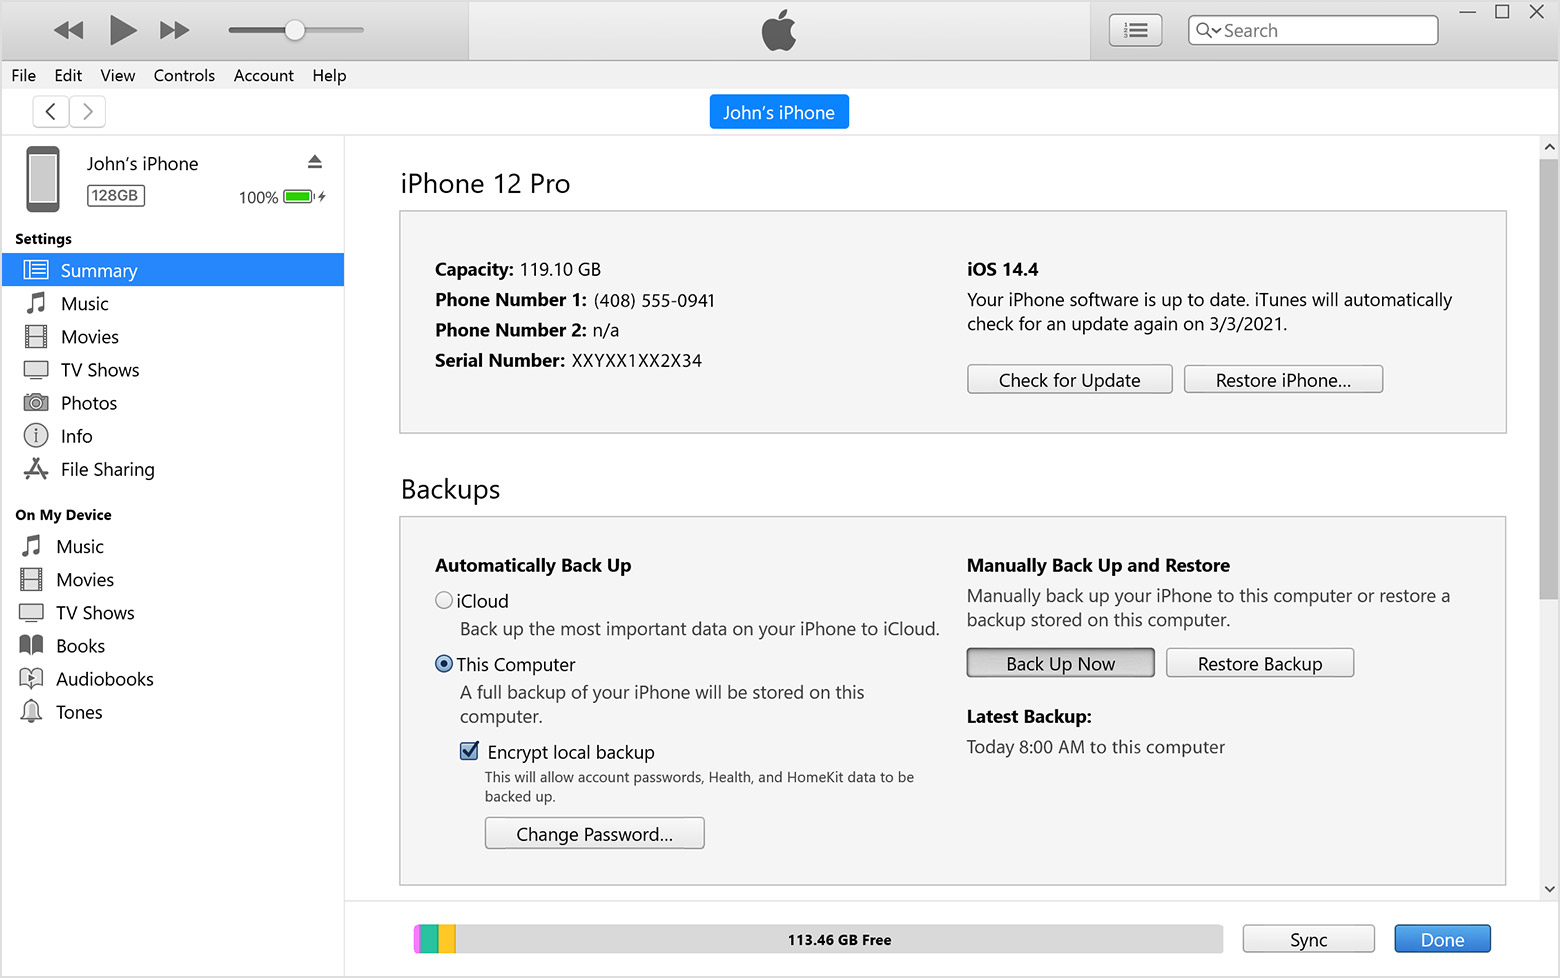 windows10-itunes12-device-sync-summary-back-up-now-on-click.jpg